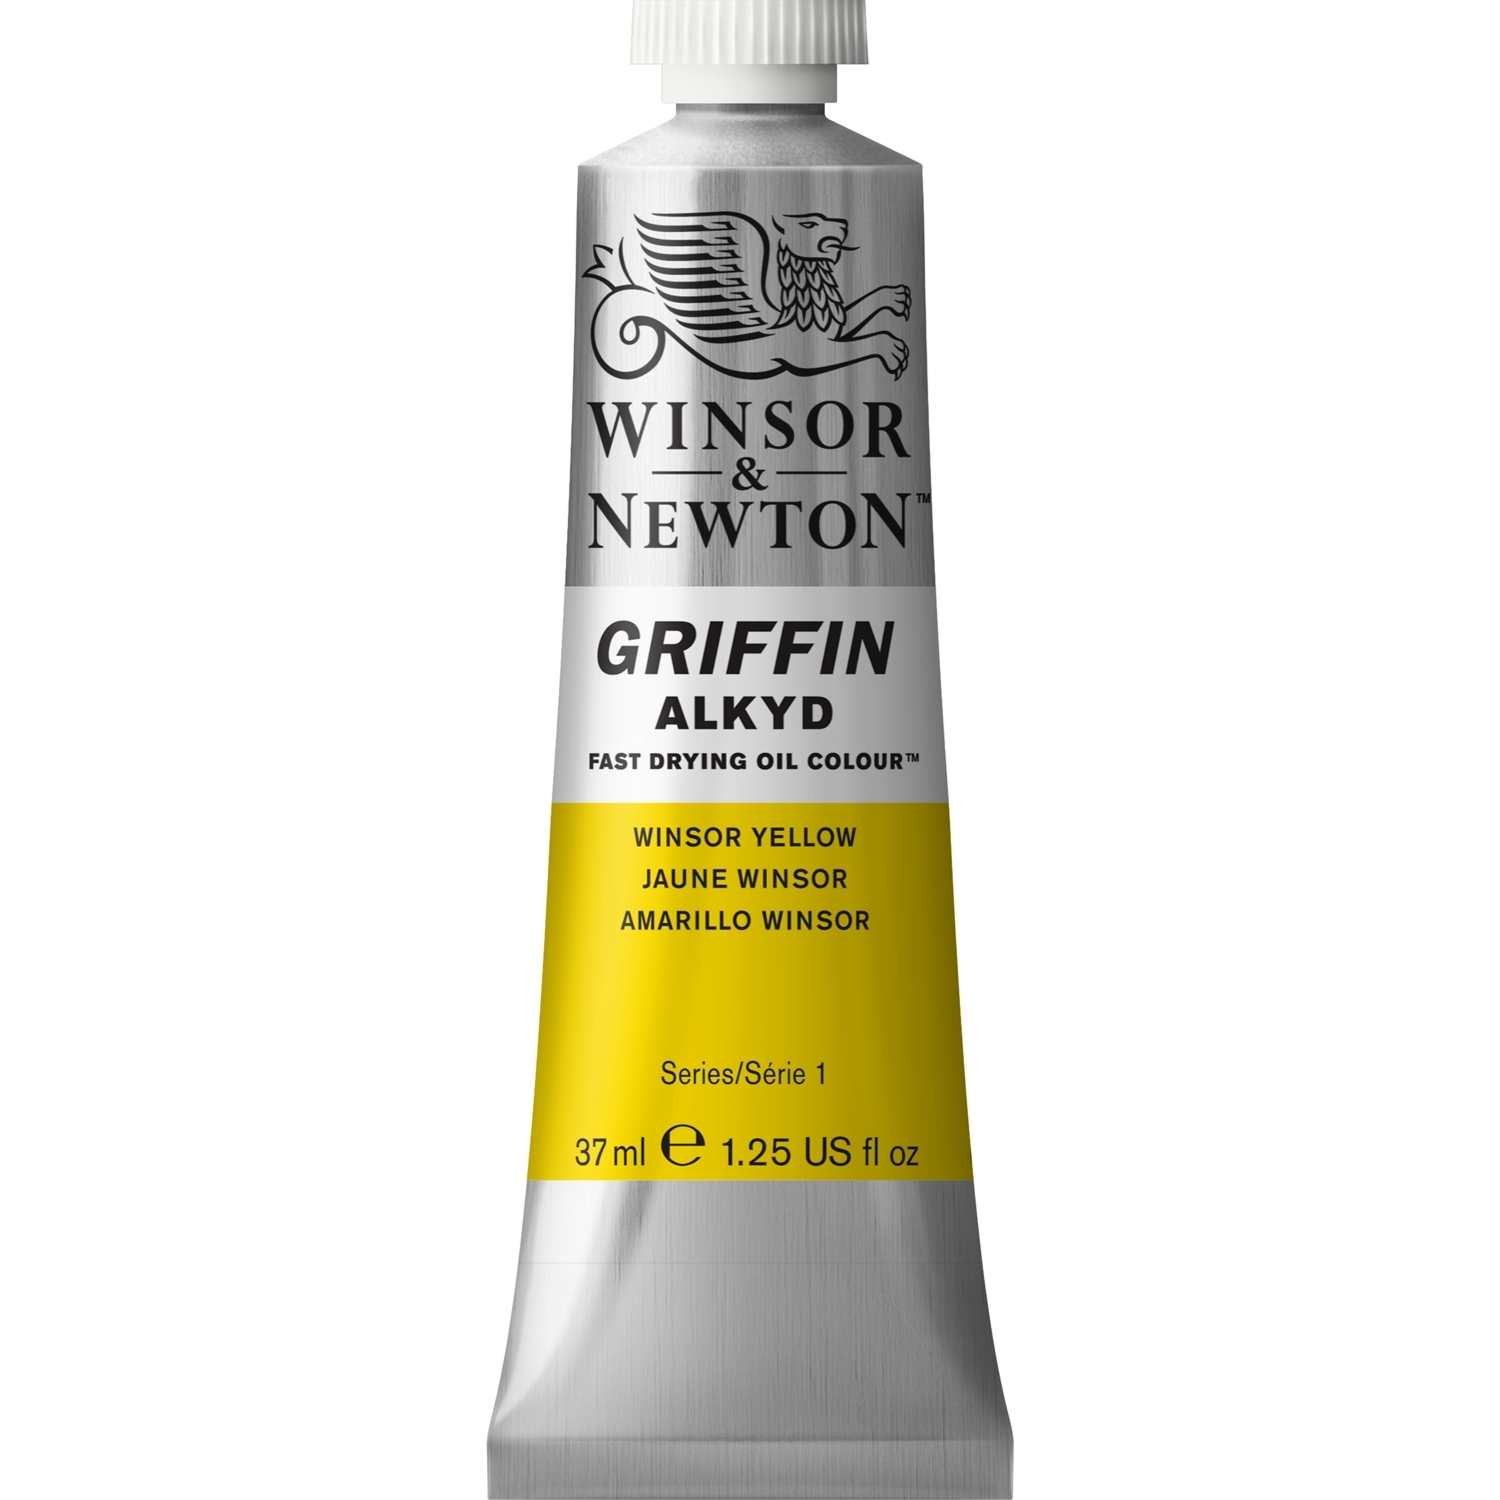 Winsor and Newton Griffin Alkyd Oil Colour - Winsor Yellow Image 1